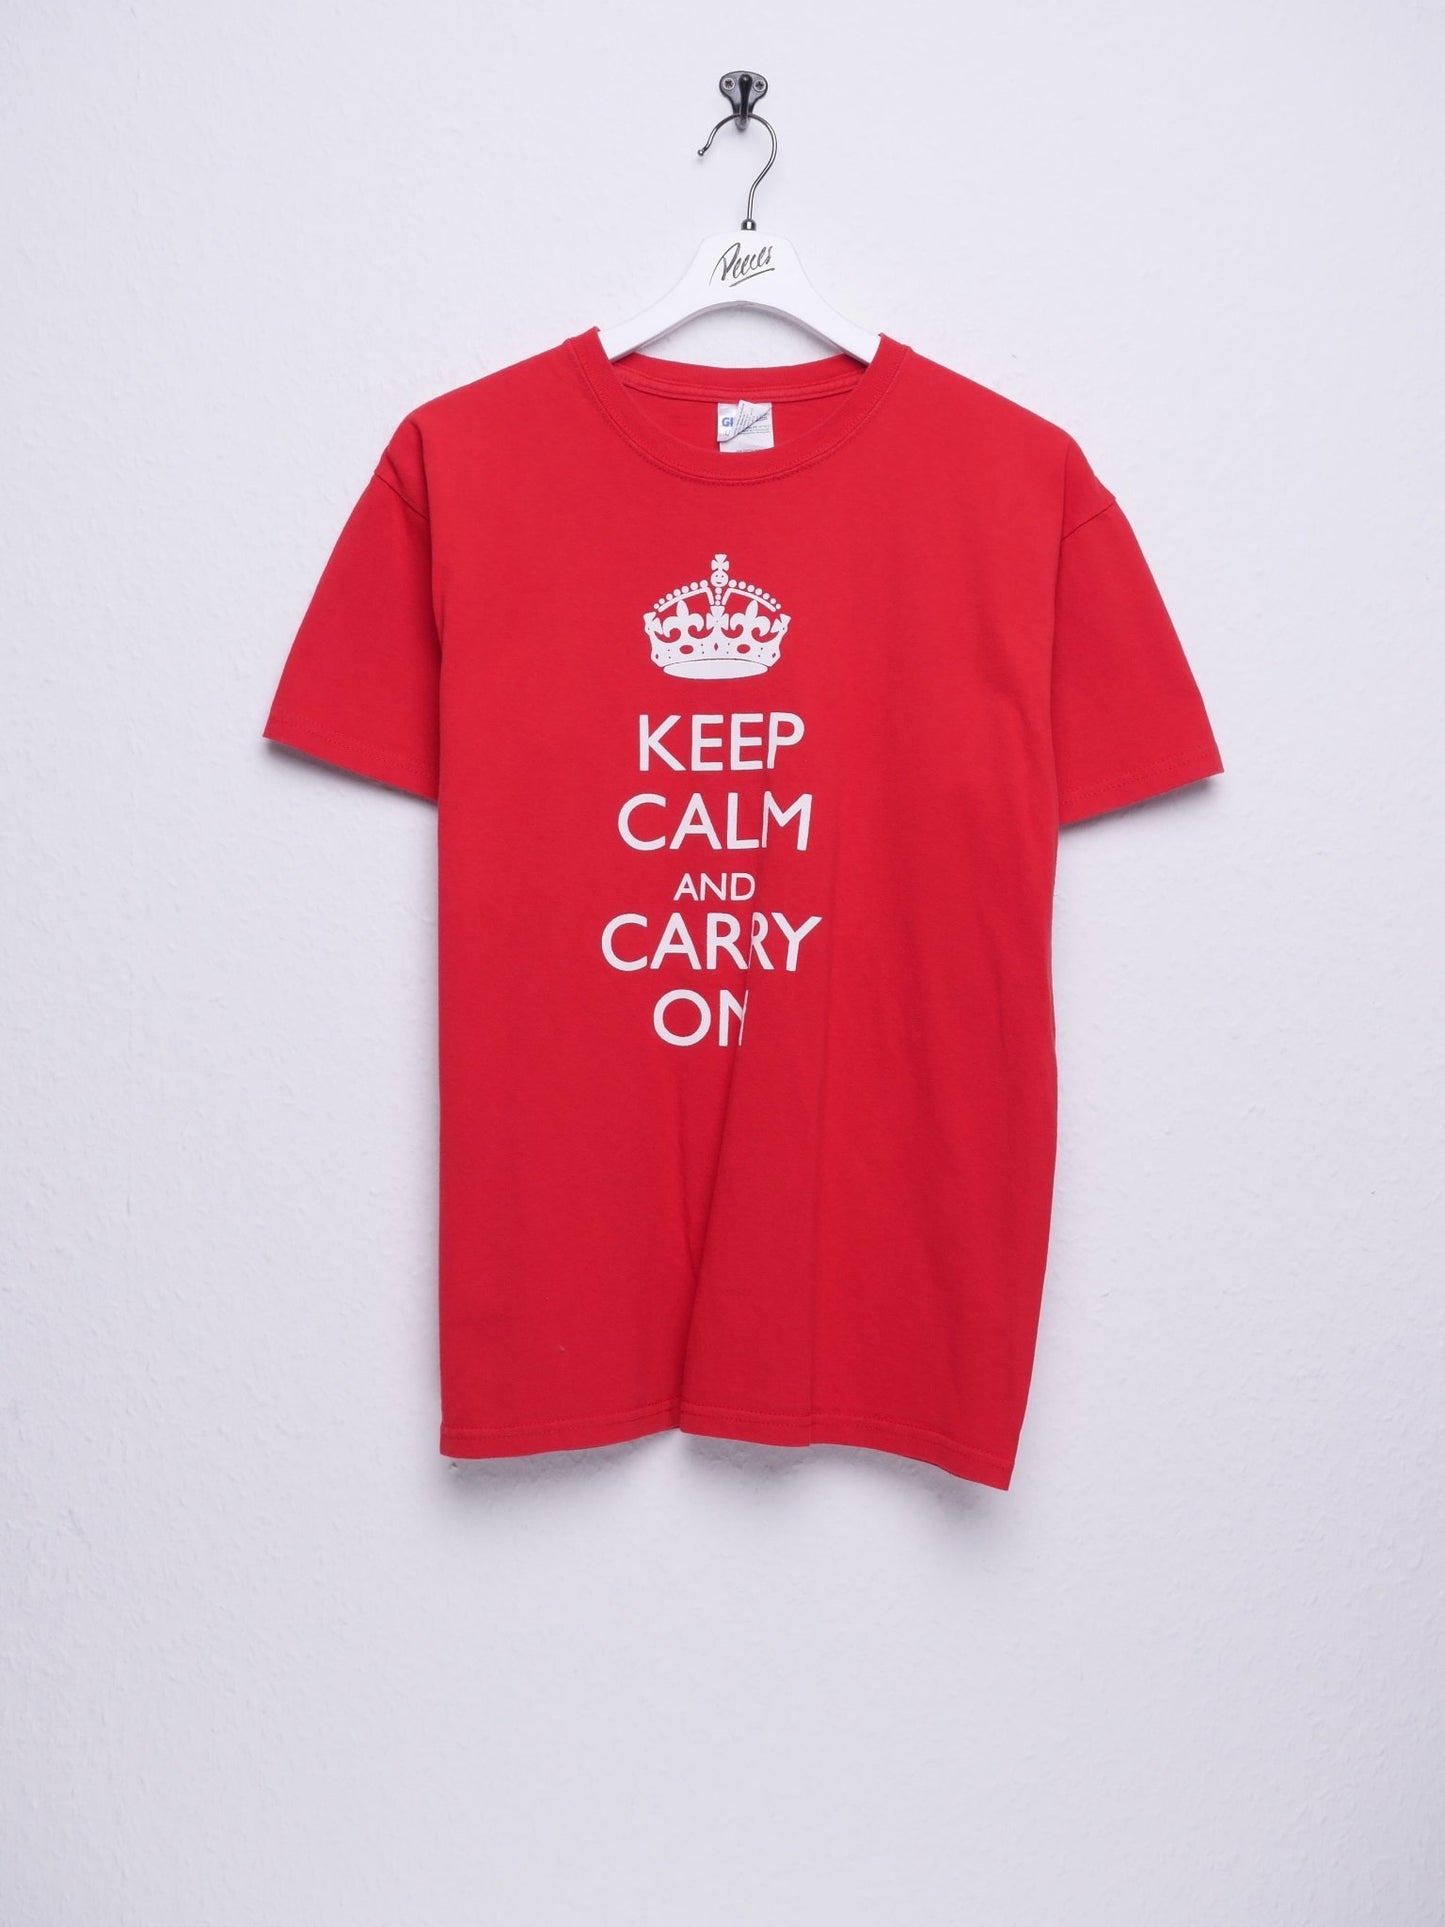 Keep Calm And Carry On printed Spellout Shirt - Peeces